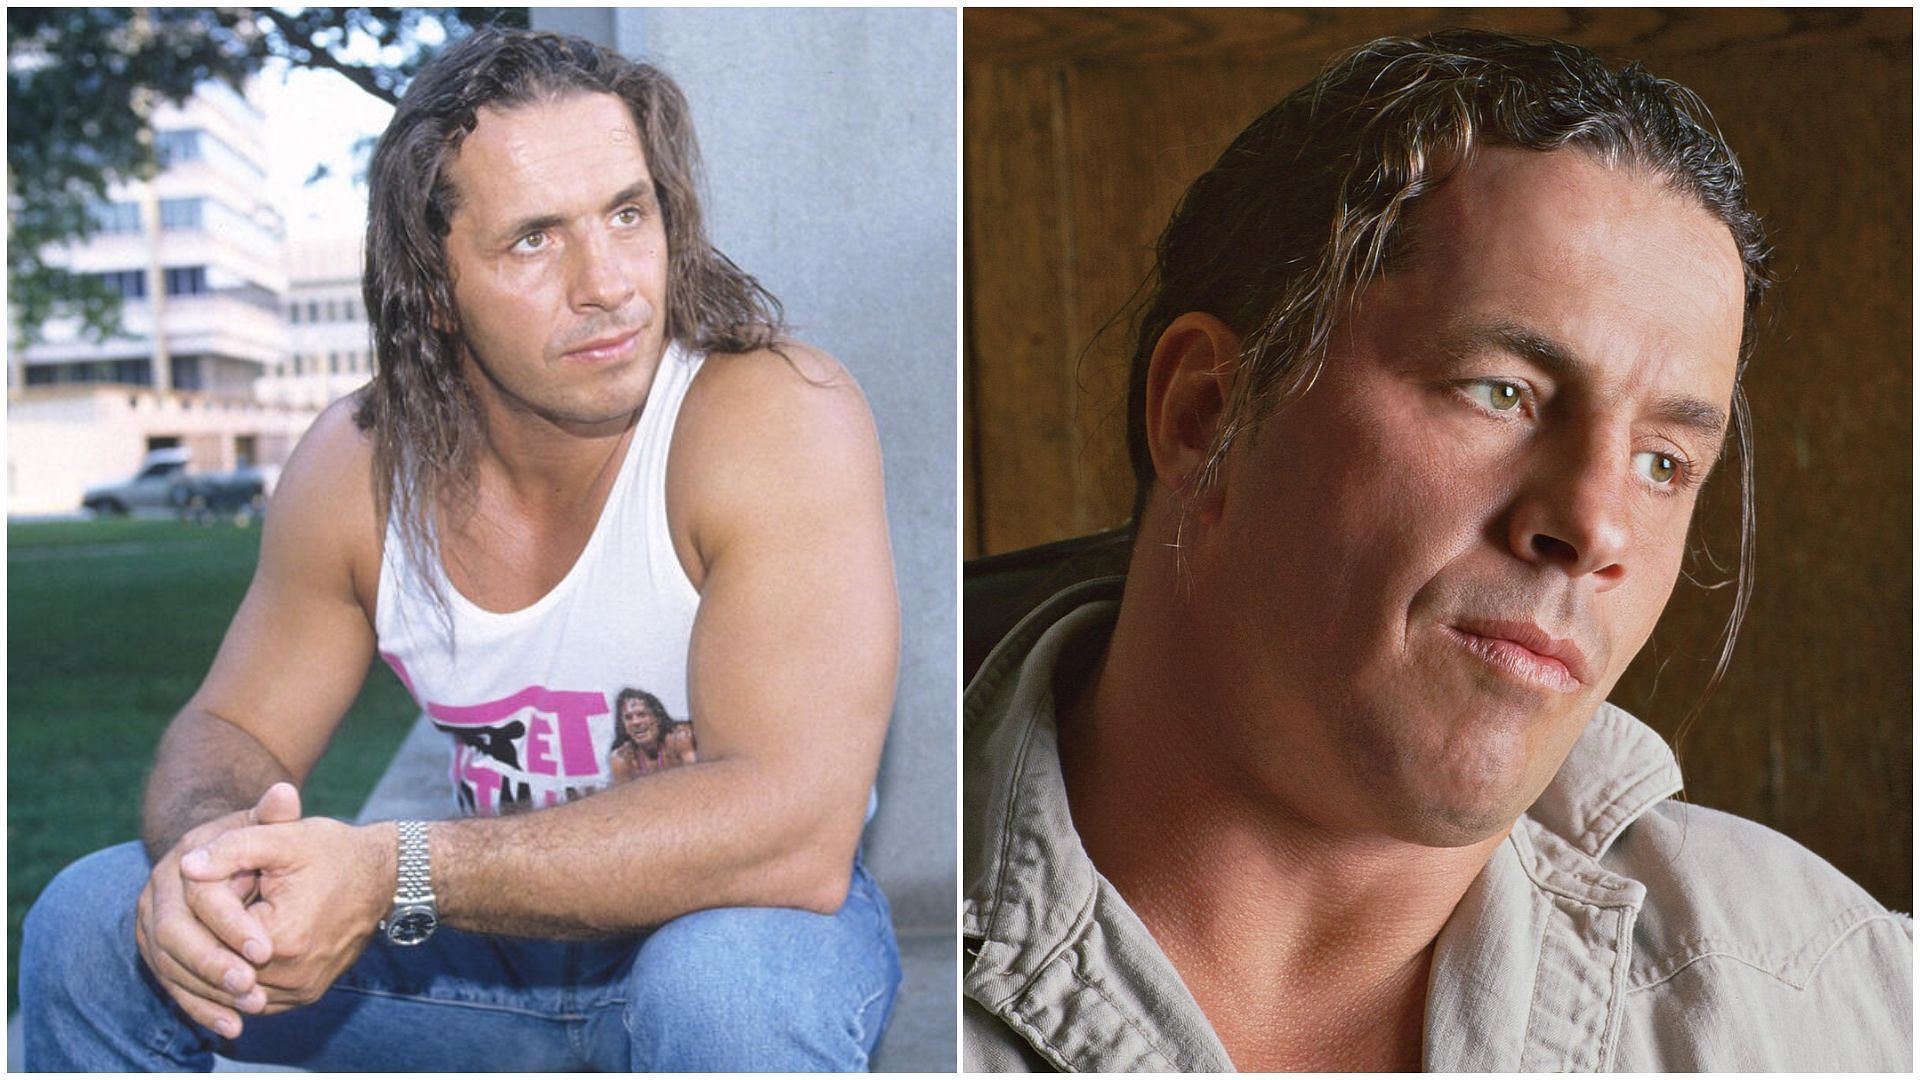 Bret Hart is a WWE Hall of Famer.